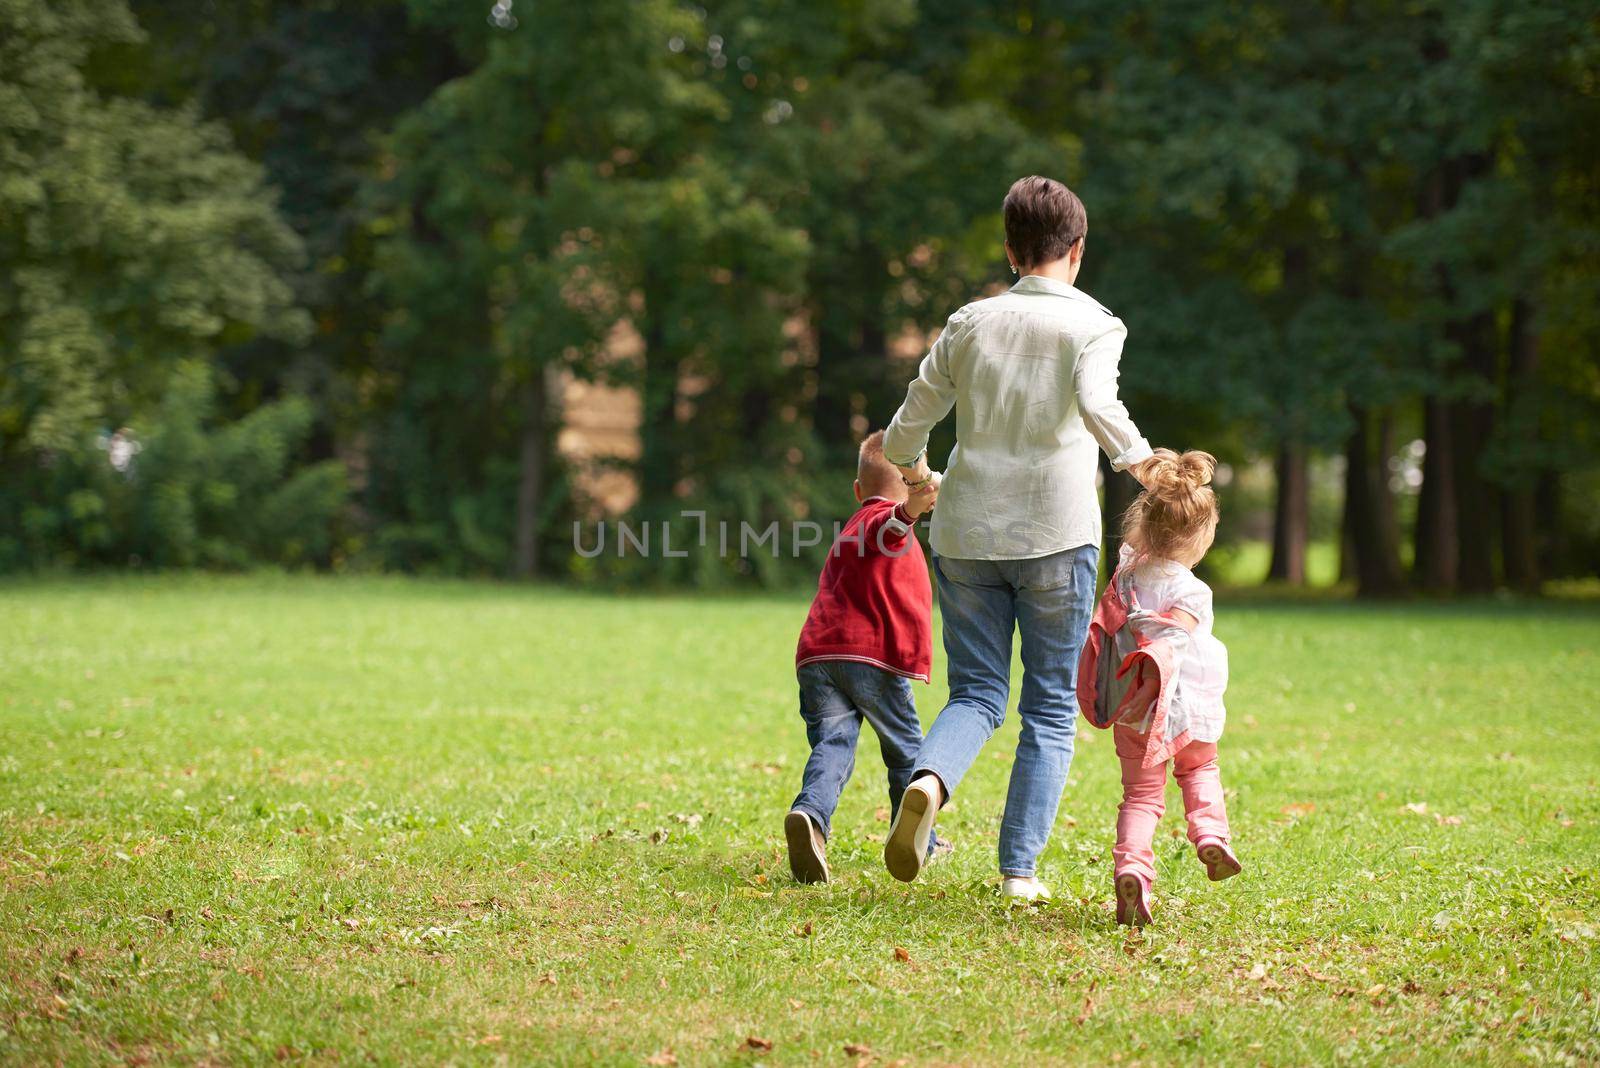 happy family playing together outdoor in park by dotshock